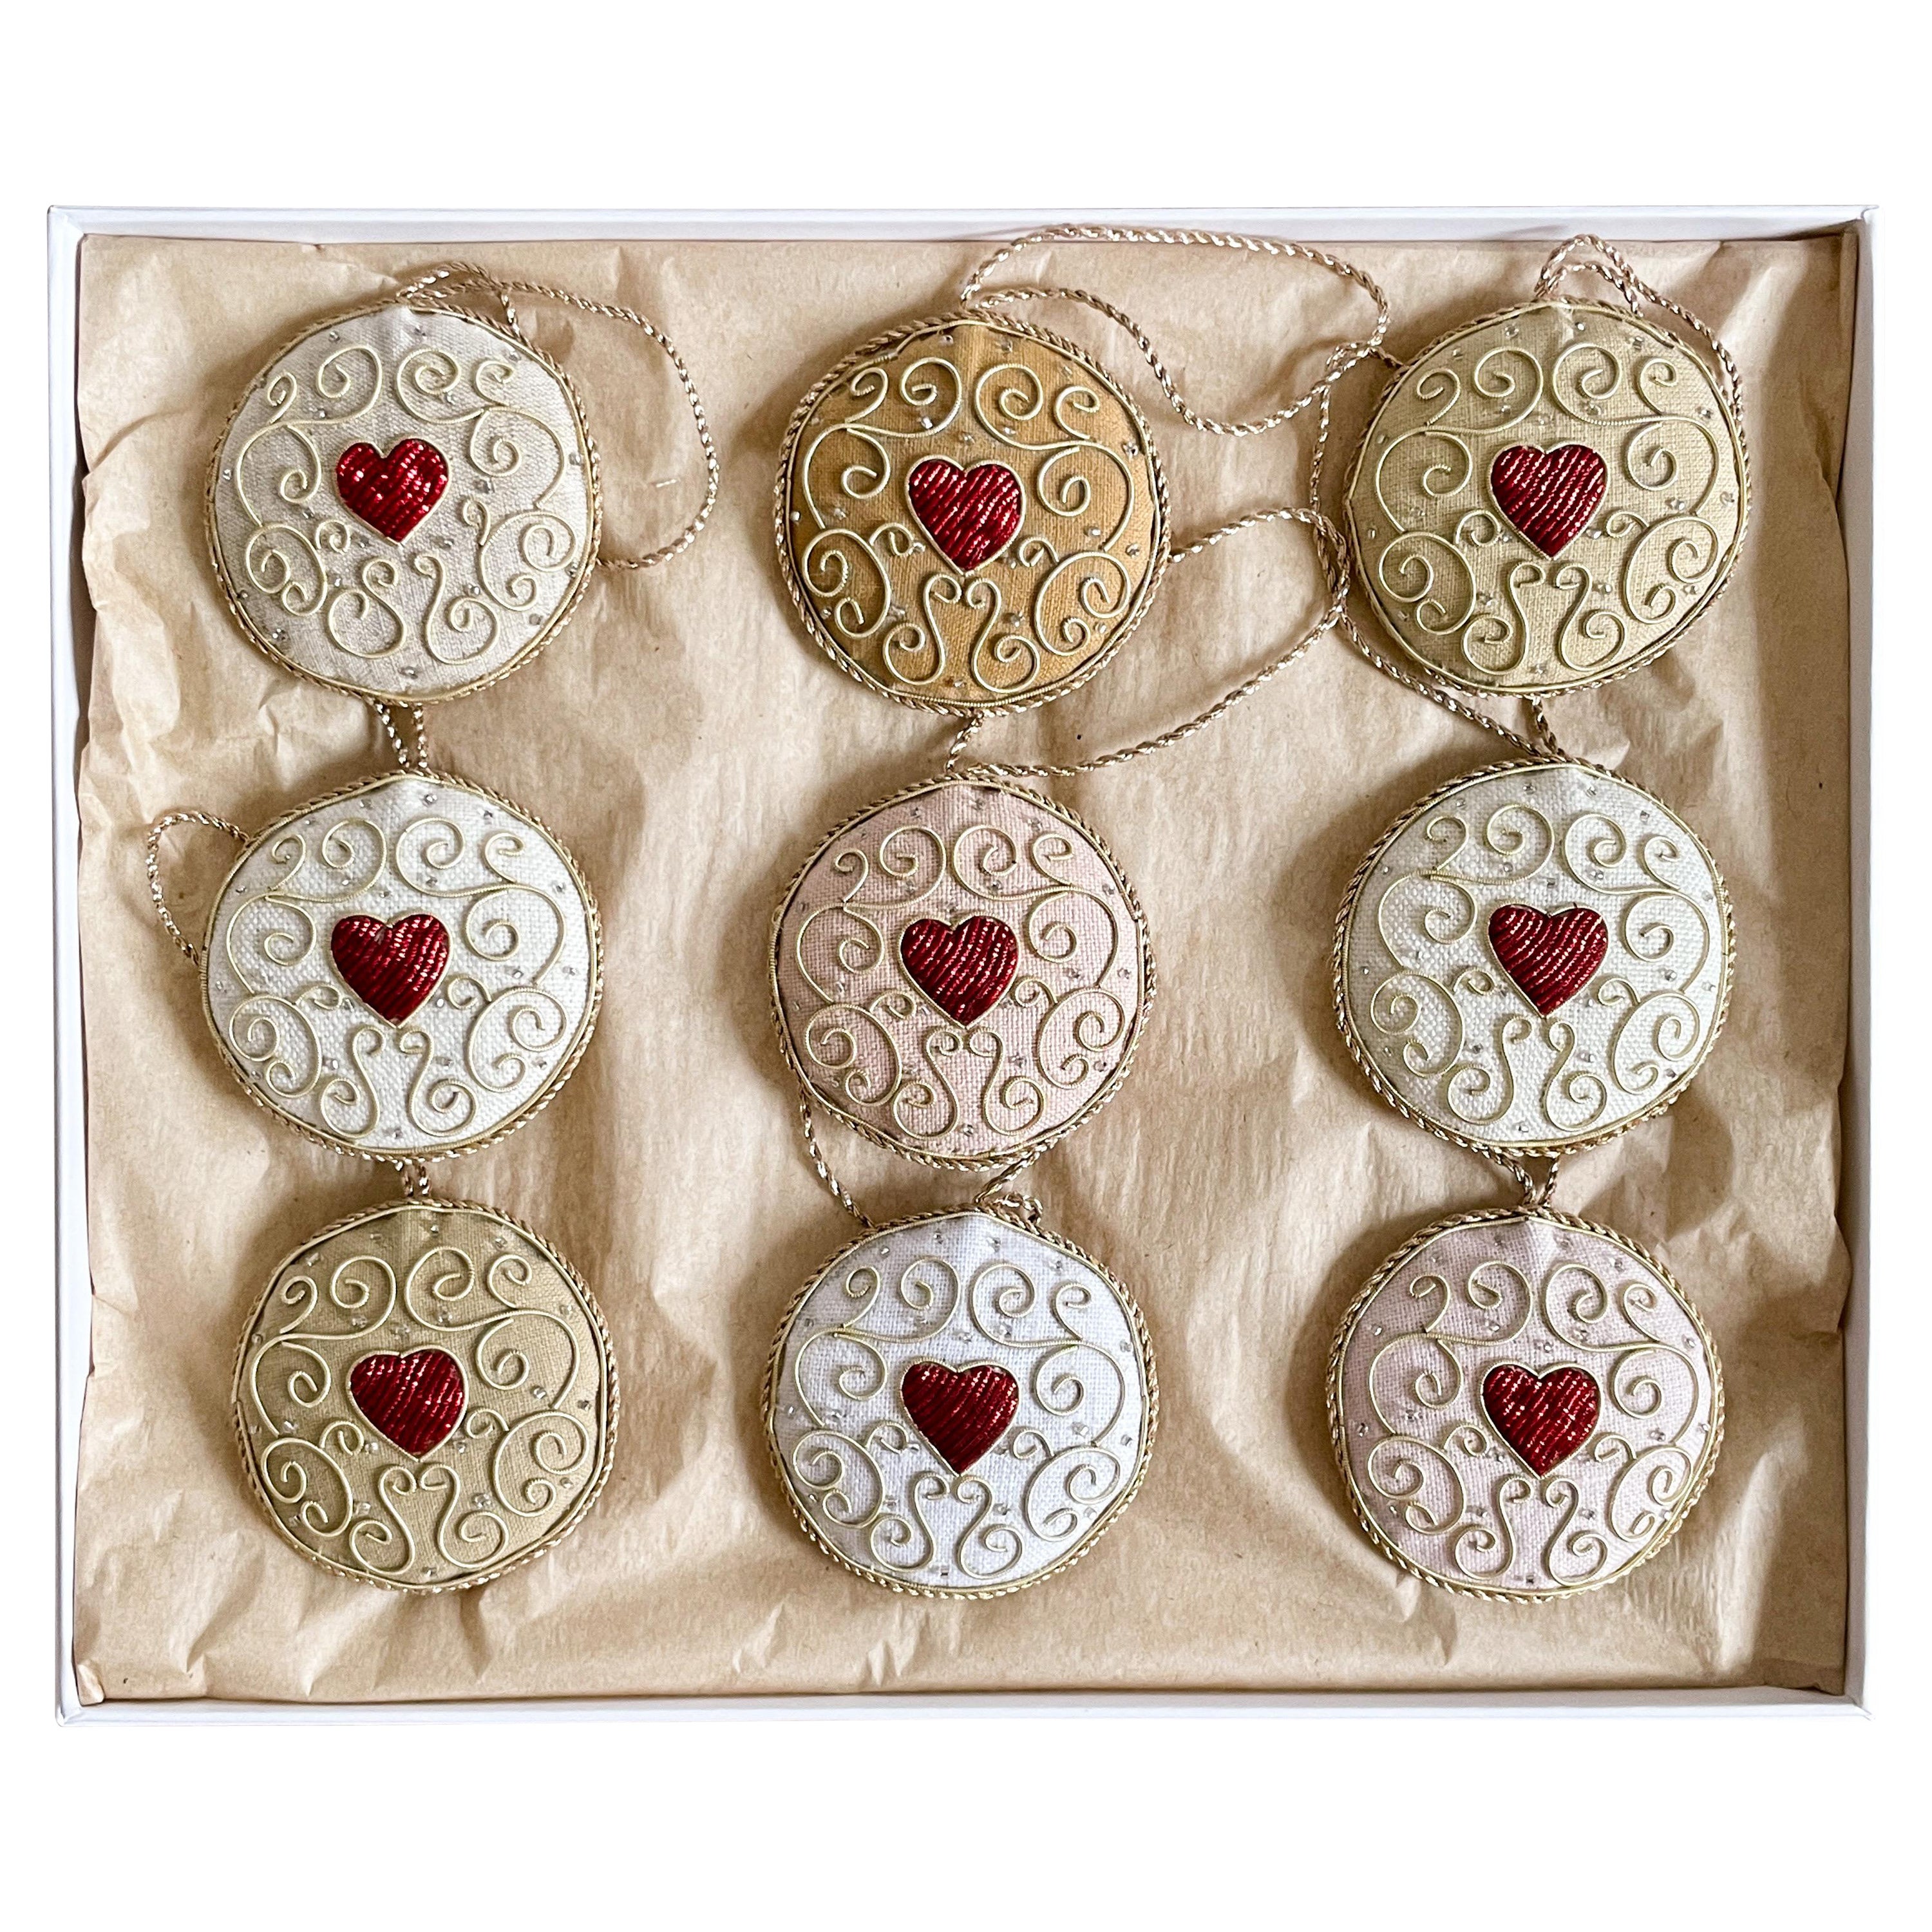 Set of 9 limited edition Artisan Irish Linen Jammie Biscuit Ornaments by Katie Larmour.

This is a luxury box set of artisan made decorative ornaments created with authentic Irish Linen, exclusive to 1stdibs. They are special because they are